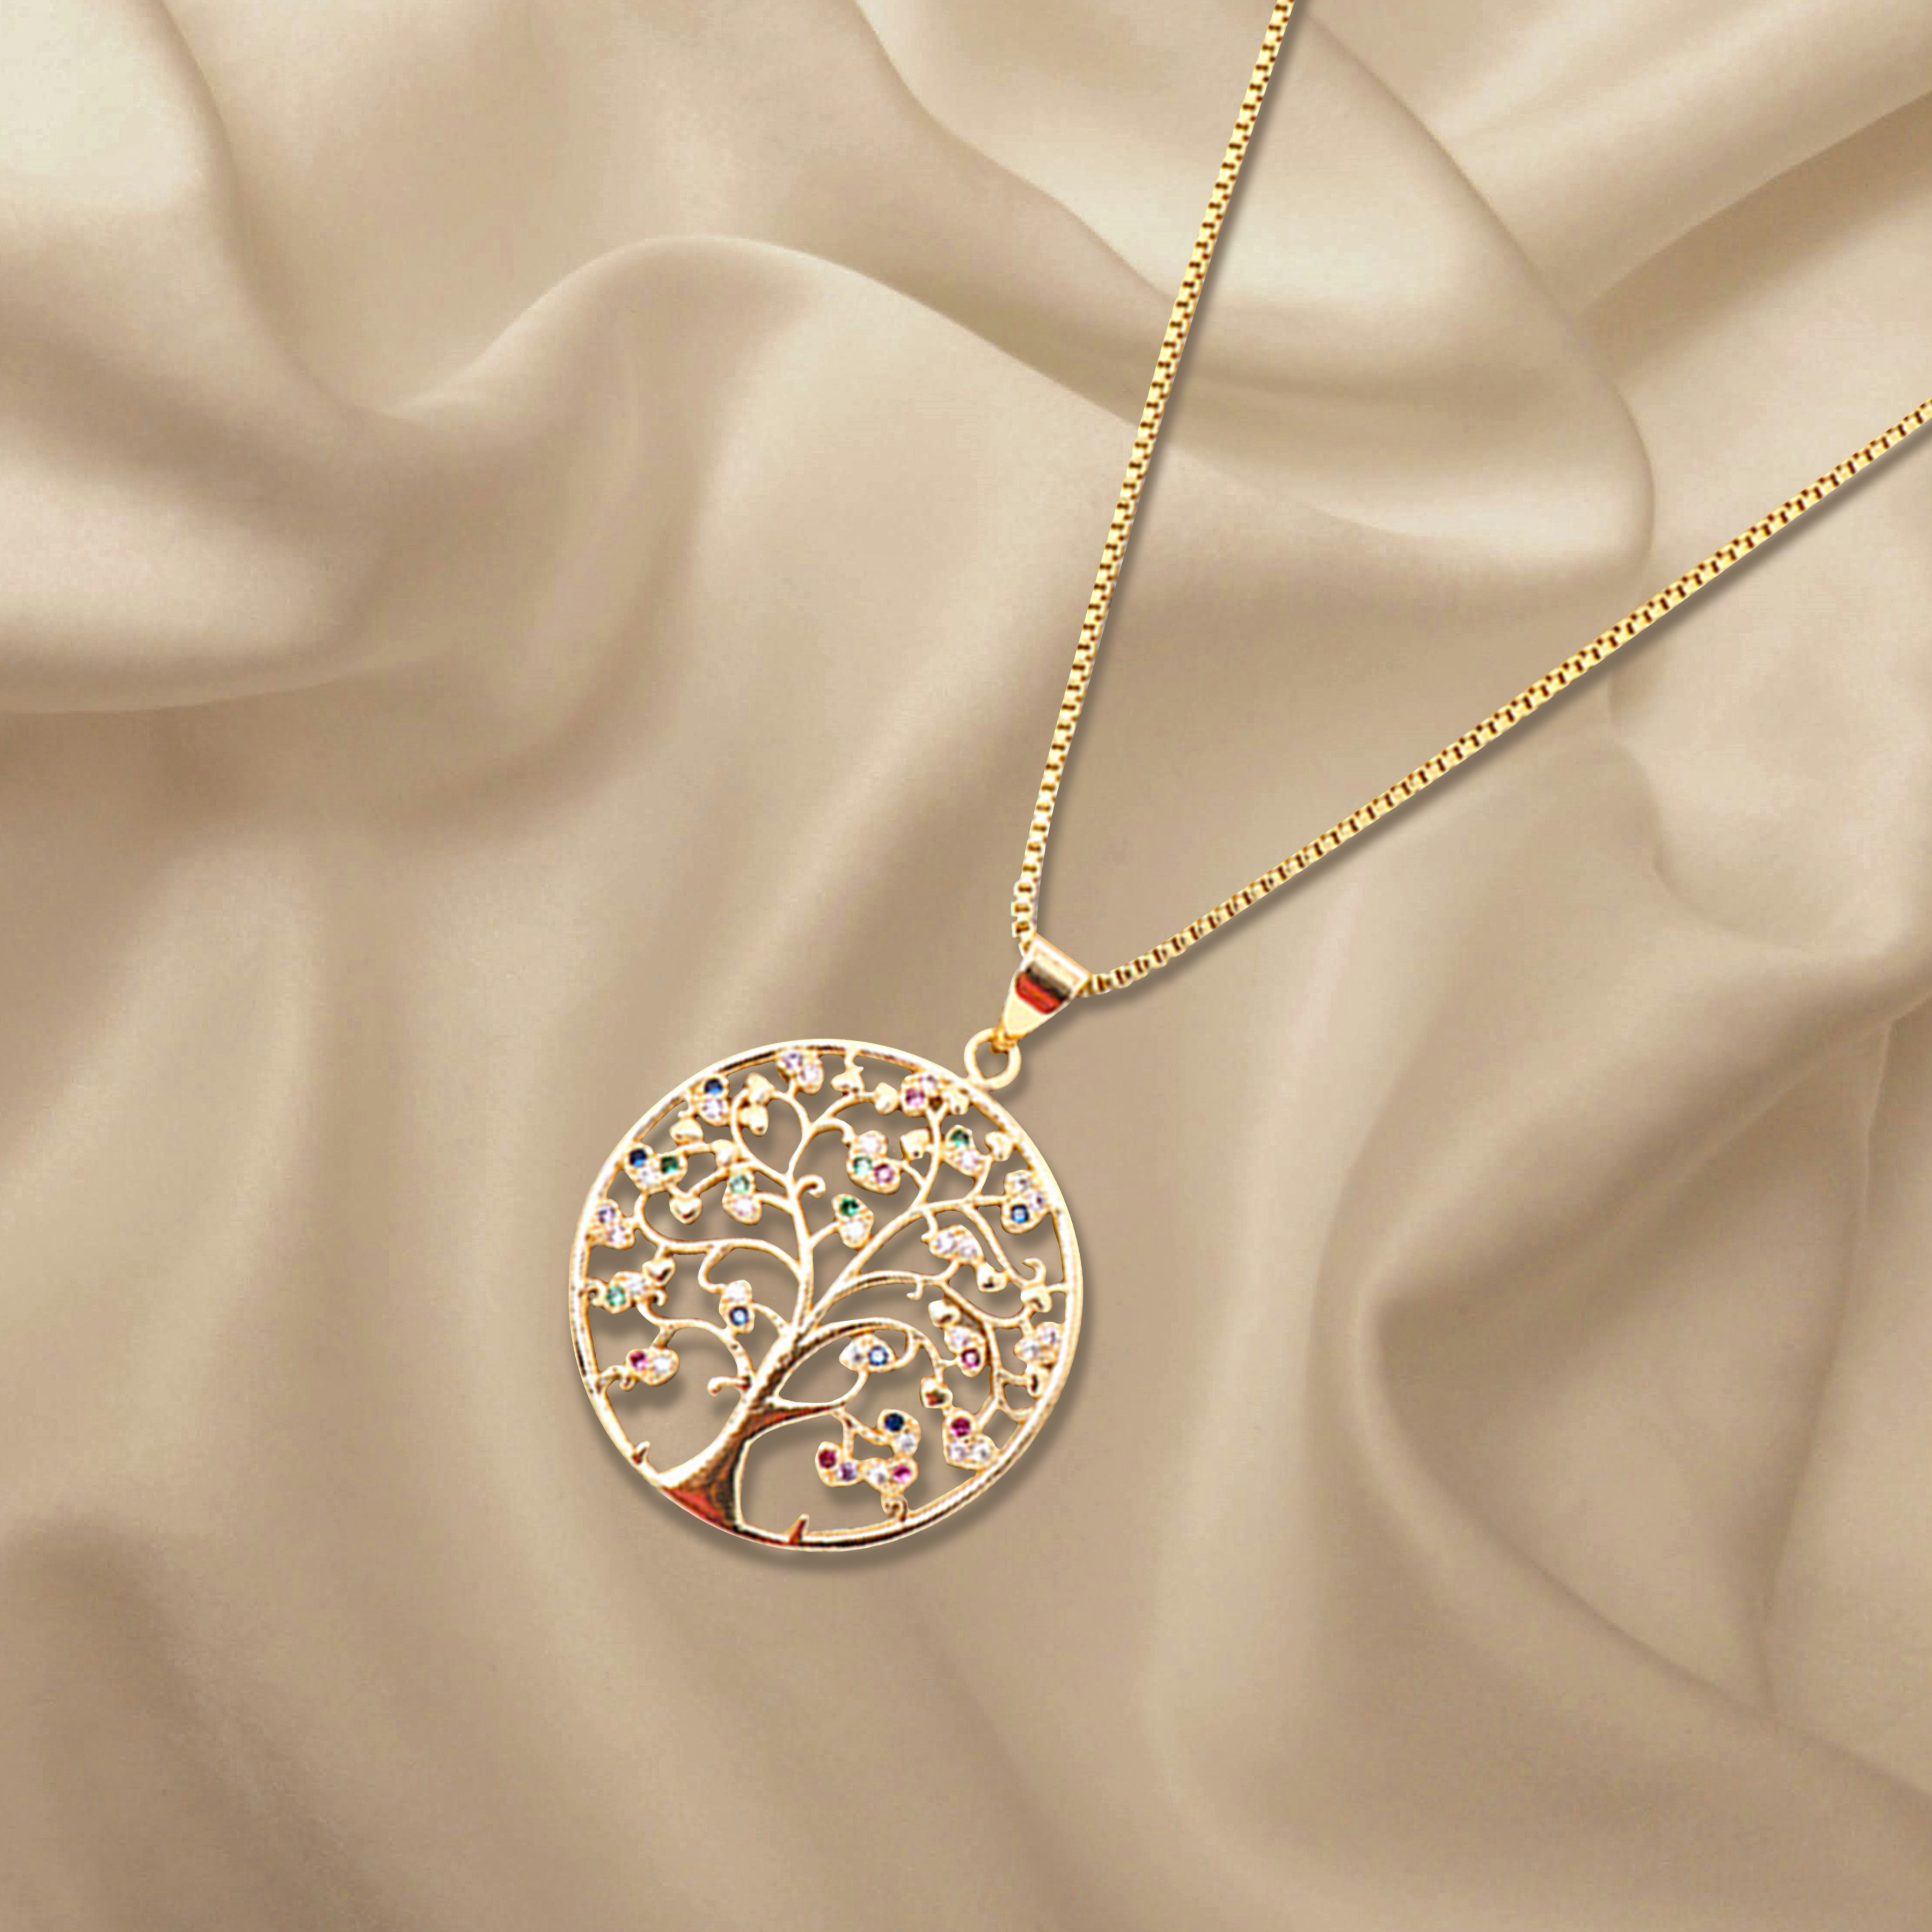 Lucklumen Zircon Tree of Life Necklace To Attract Good Luck And Protection